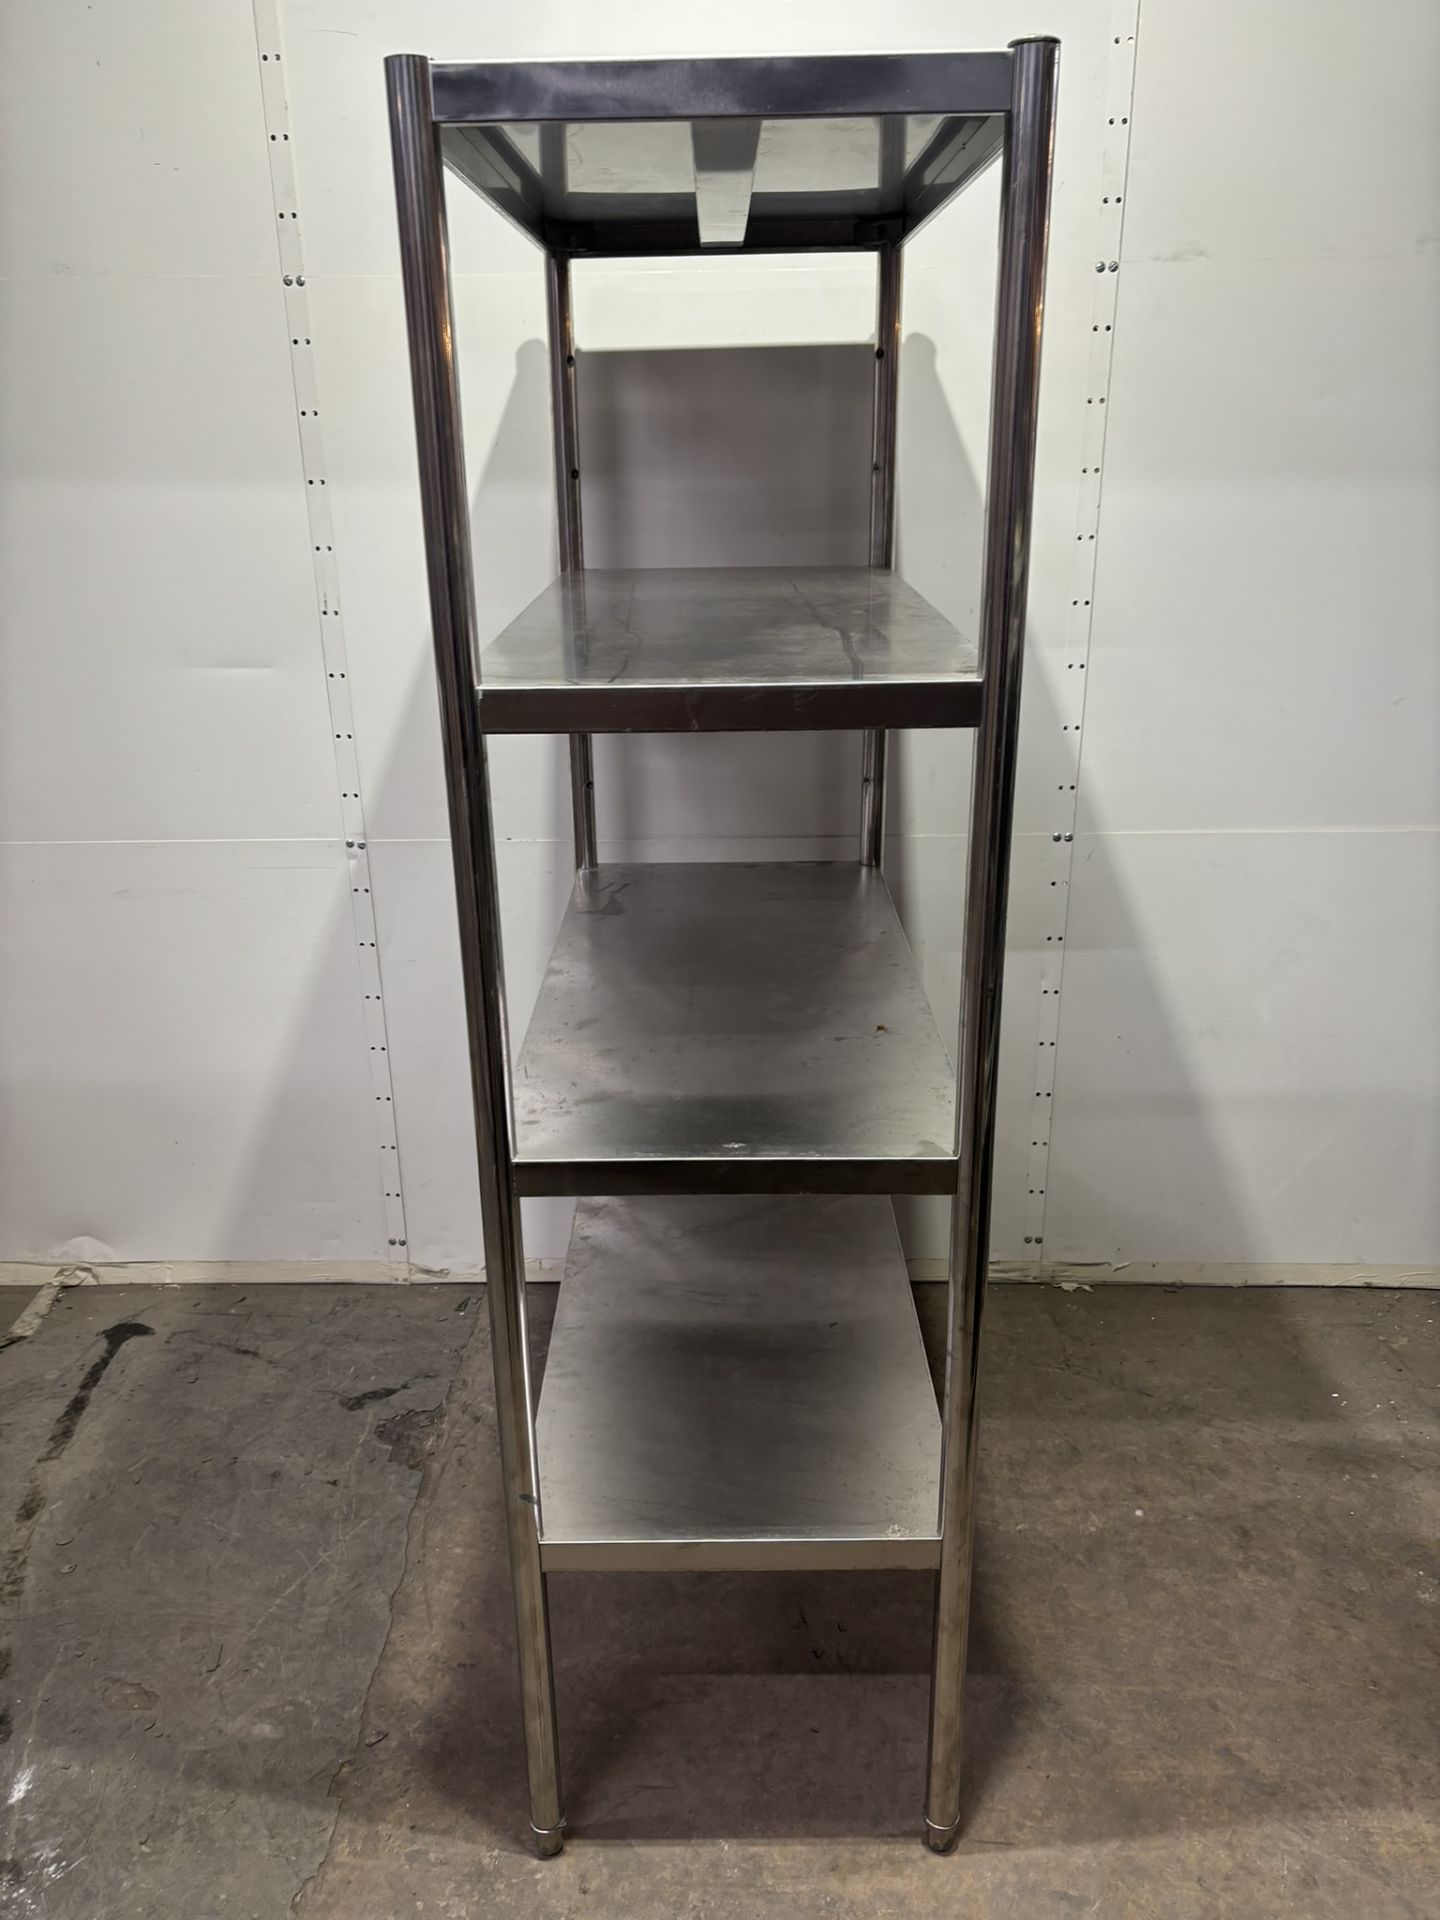 4 Tier Stainless Steel Shelving Unit - Image 4 of 4